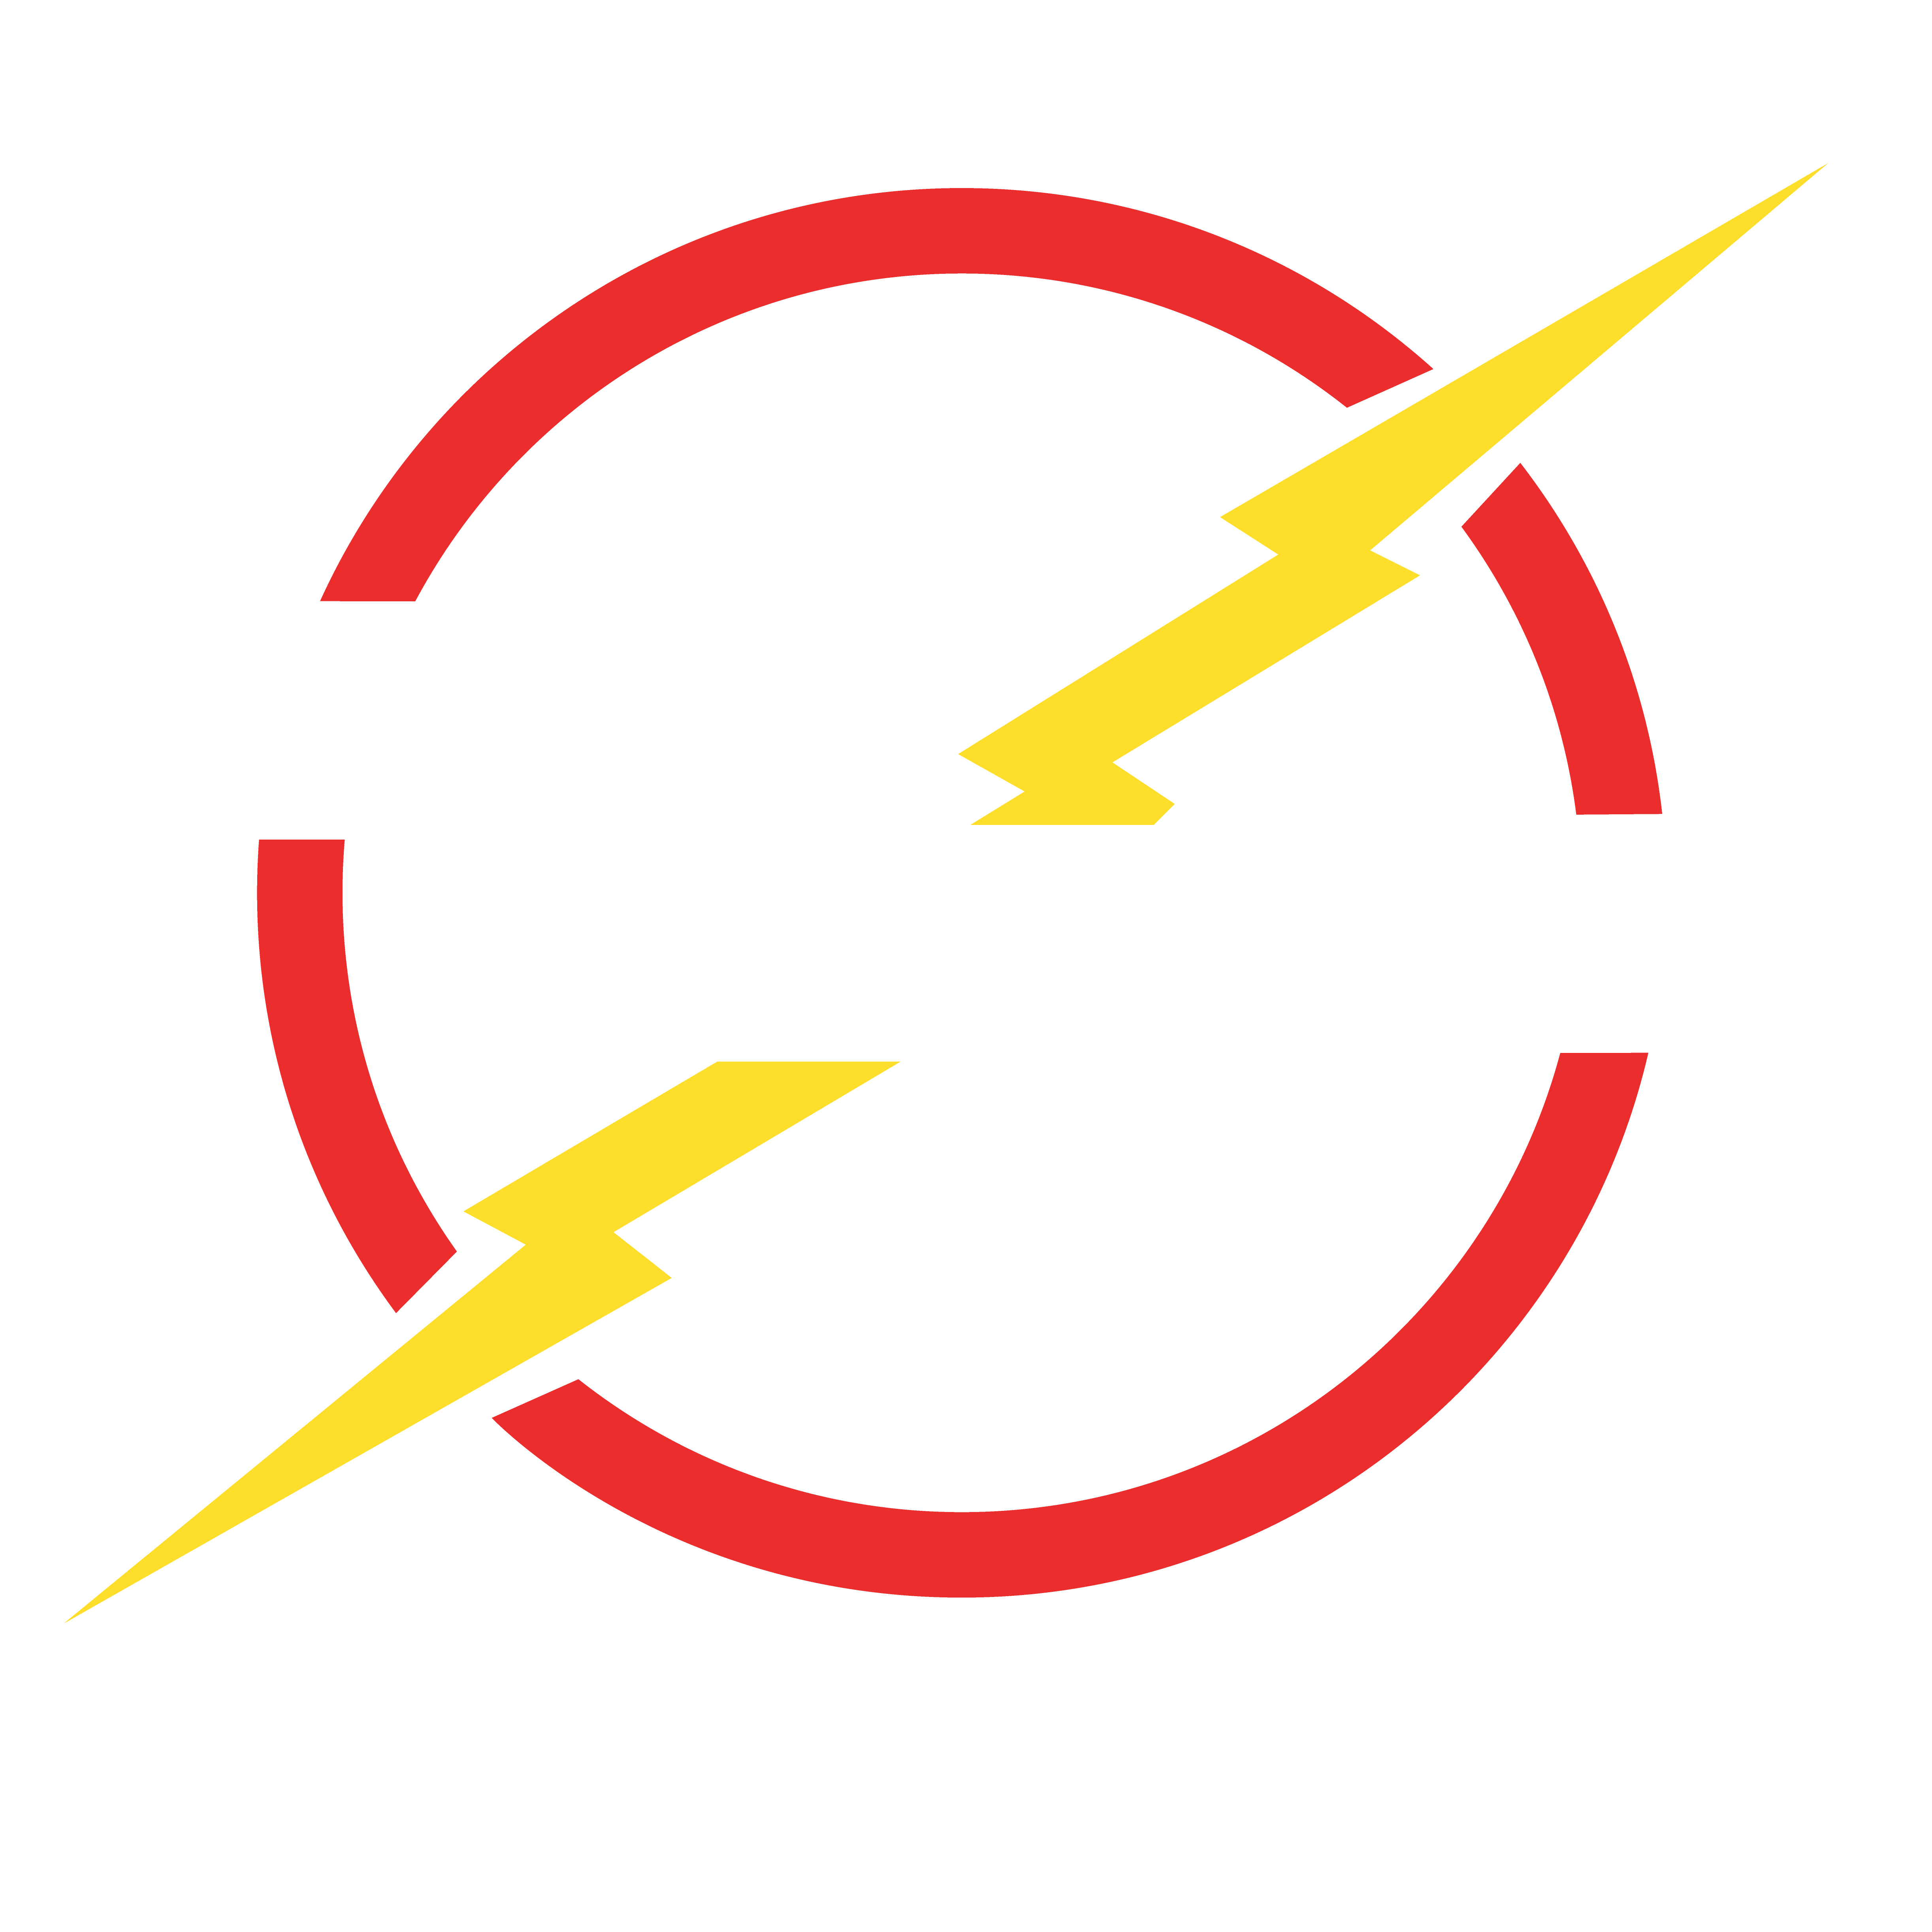 Lightning Clipart Electrical Power Symbol Lightning Electrical Power